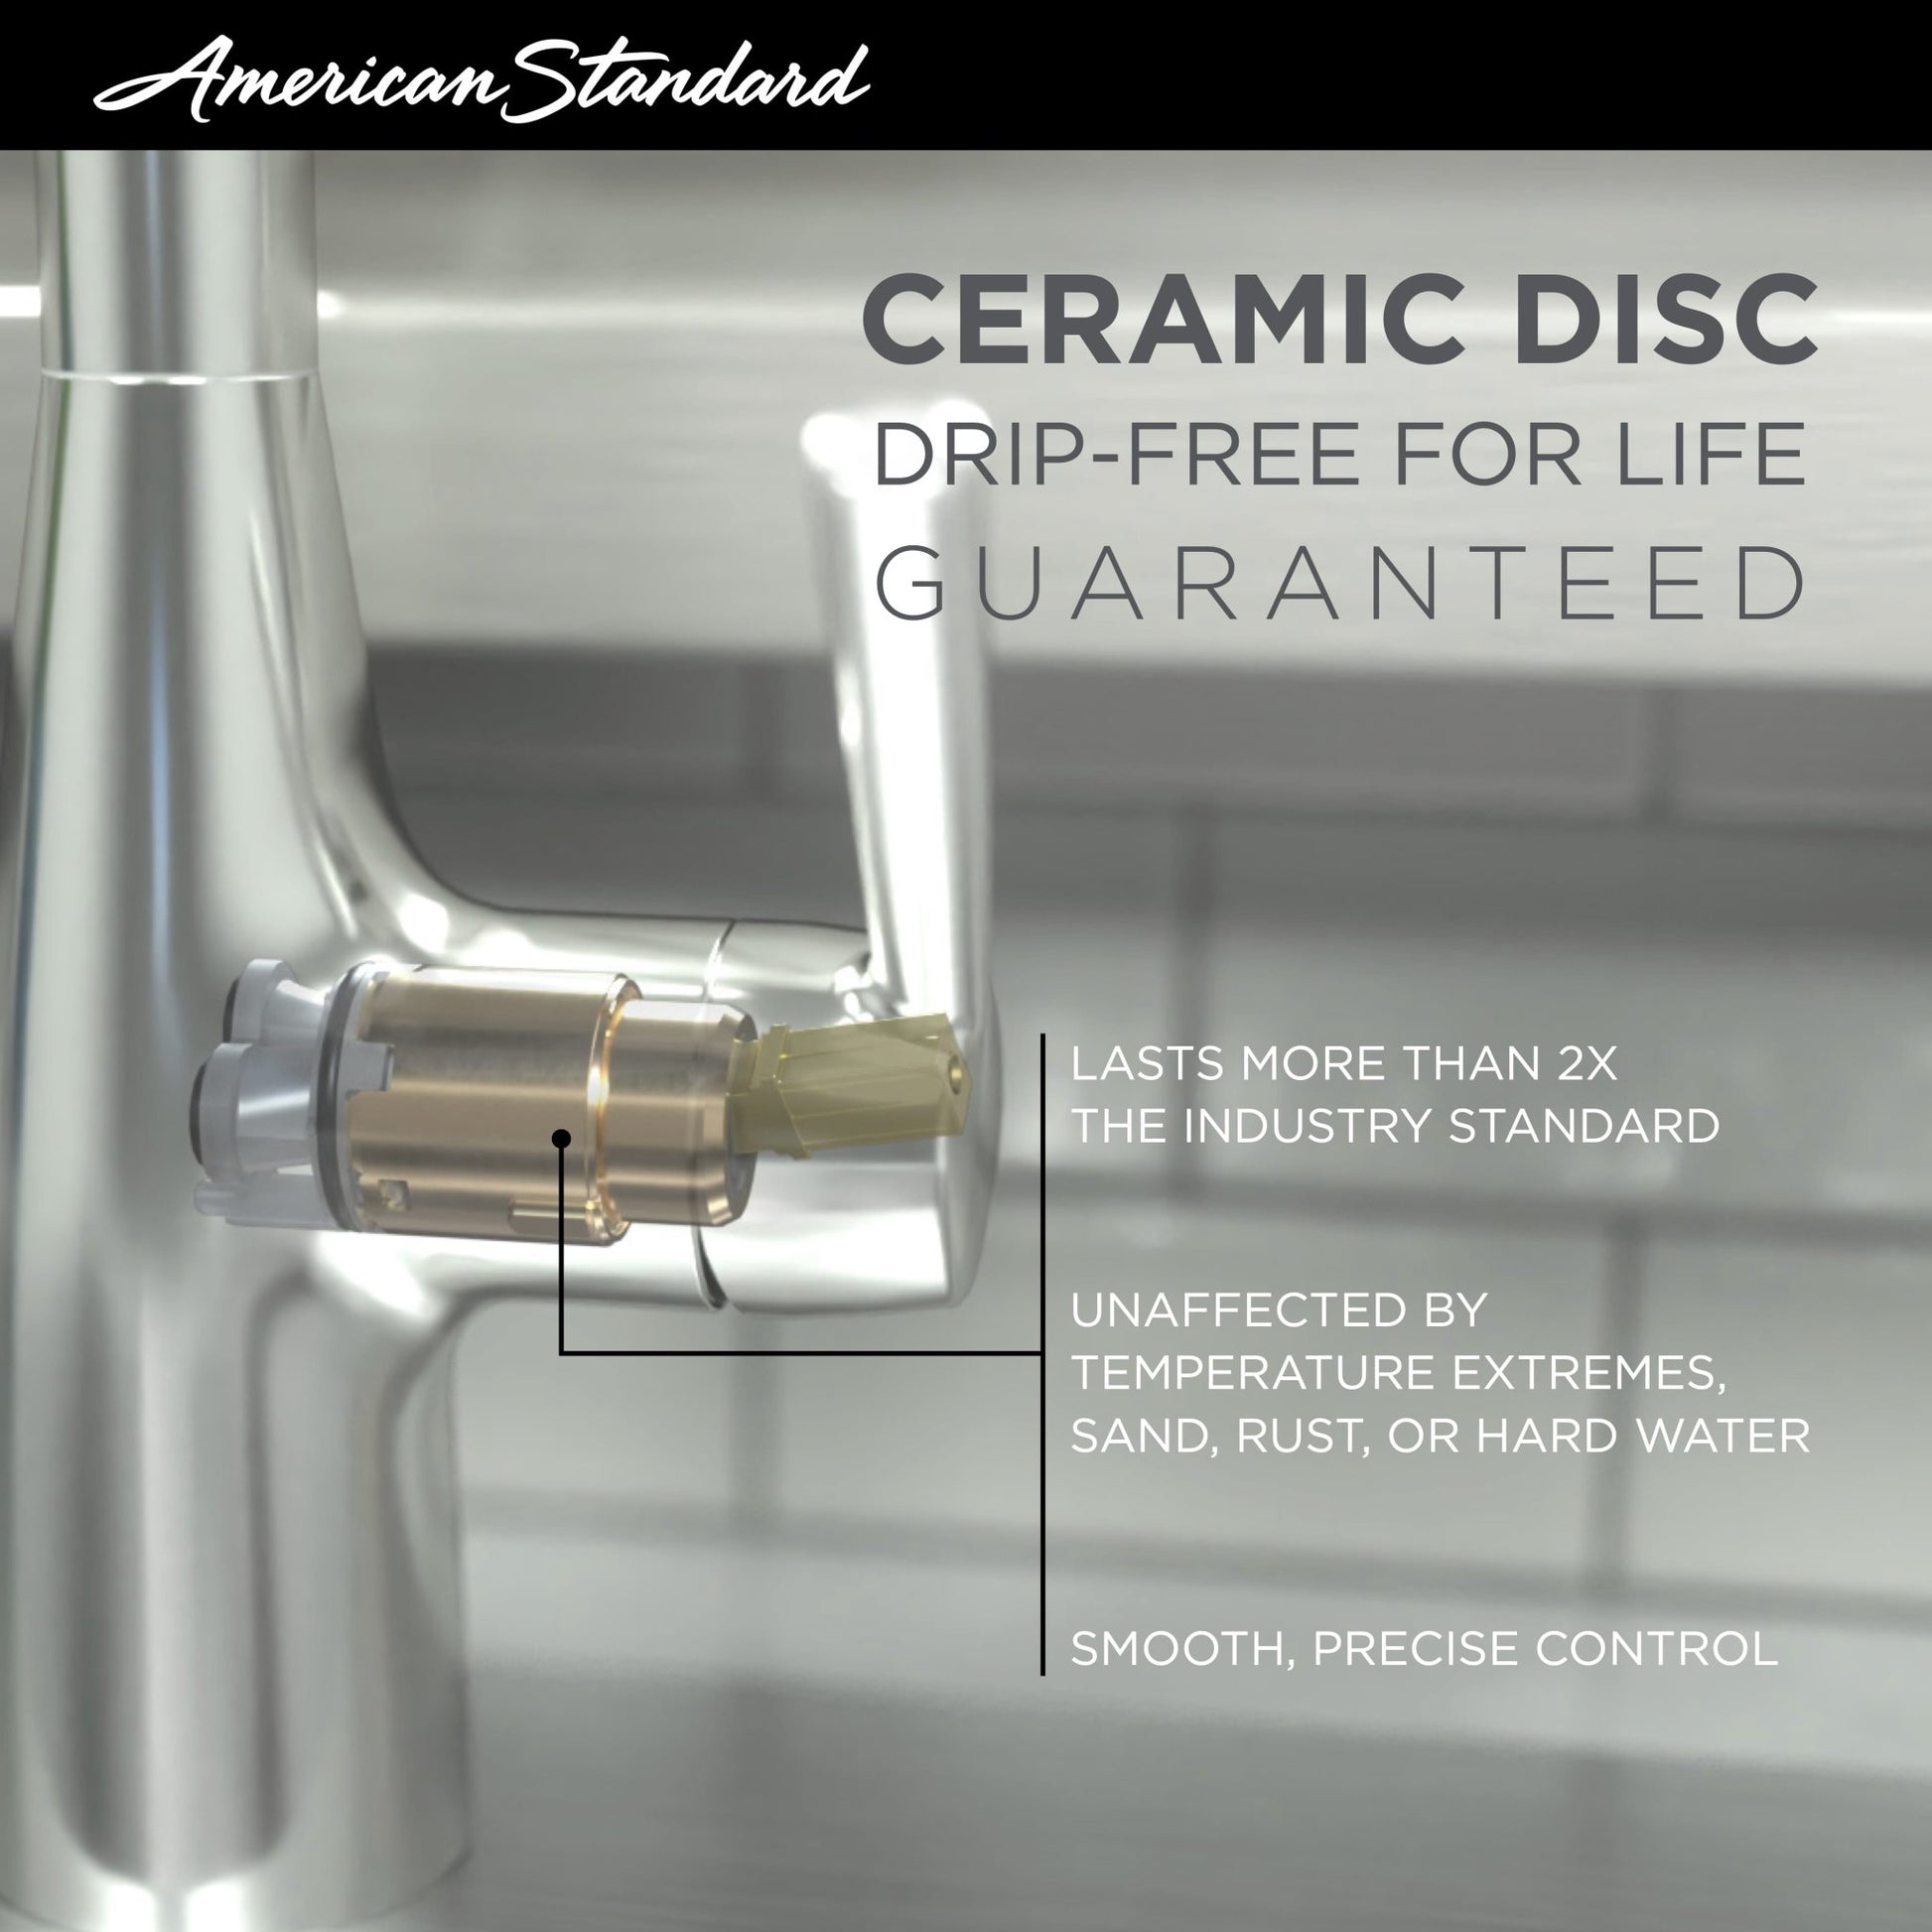 American Standard Delancey® Single-Handle Pull-Down Bar Faucet 1.5 gpm/5.7 L/min - 4279410